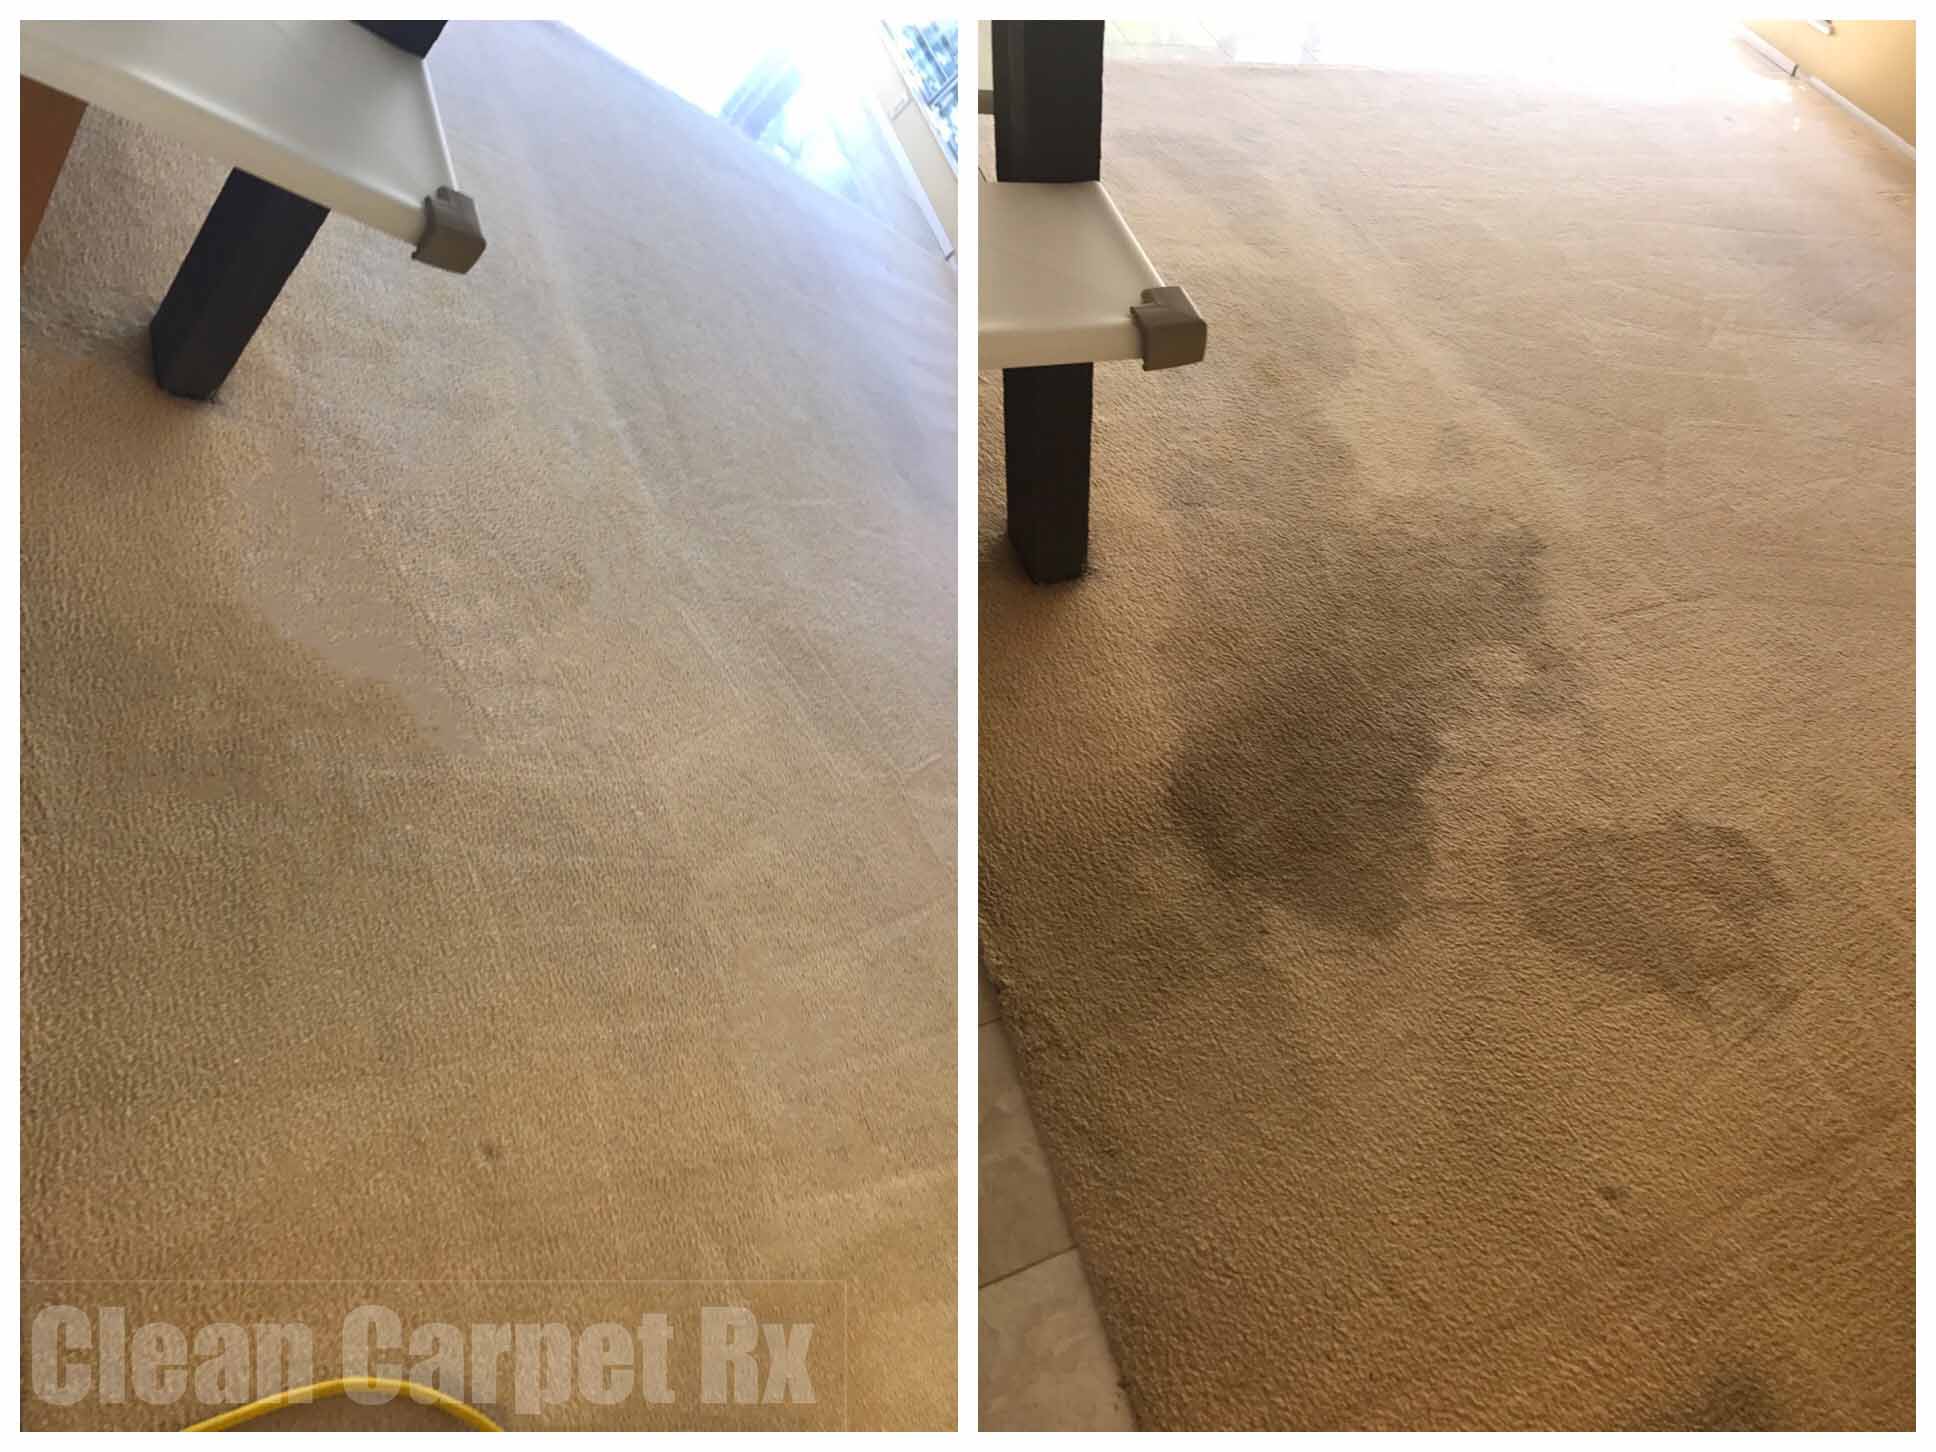 Removing urine stains - Clean Carpet Rx